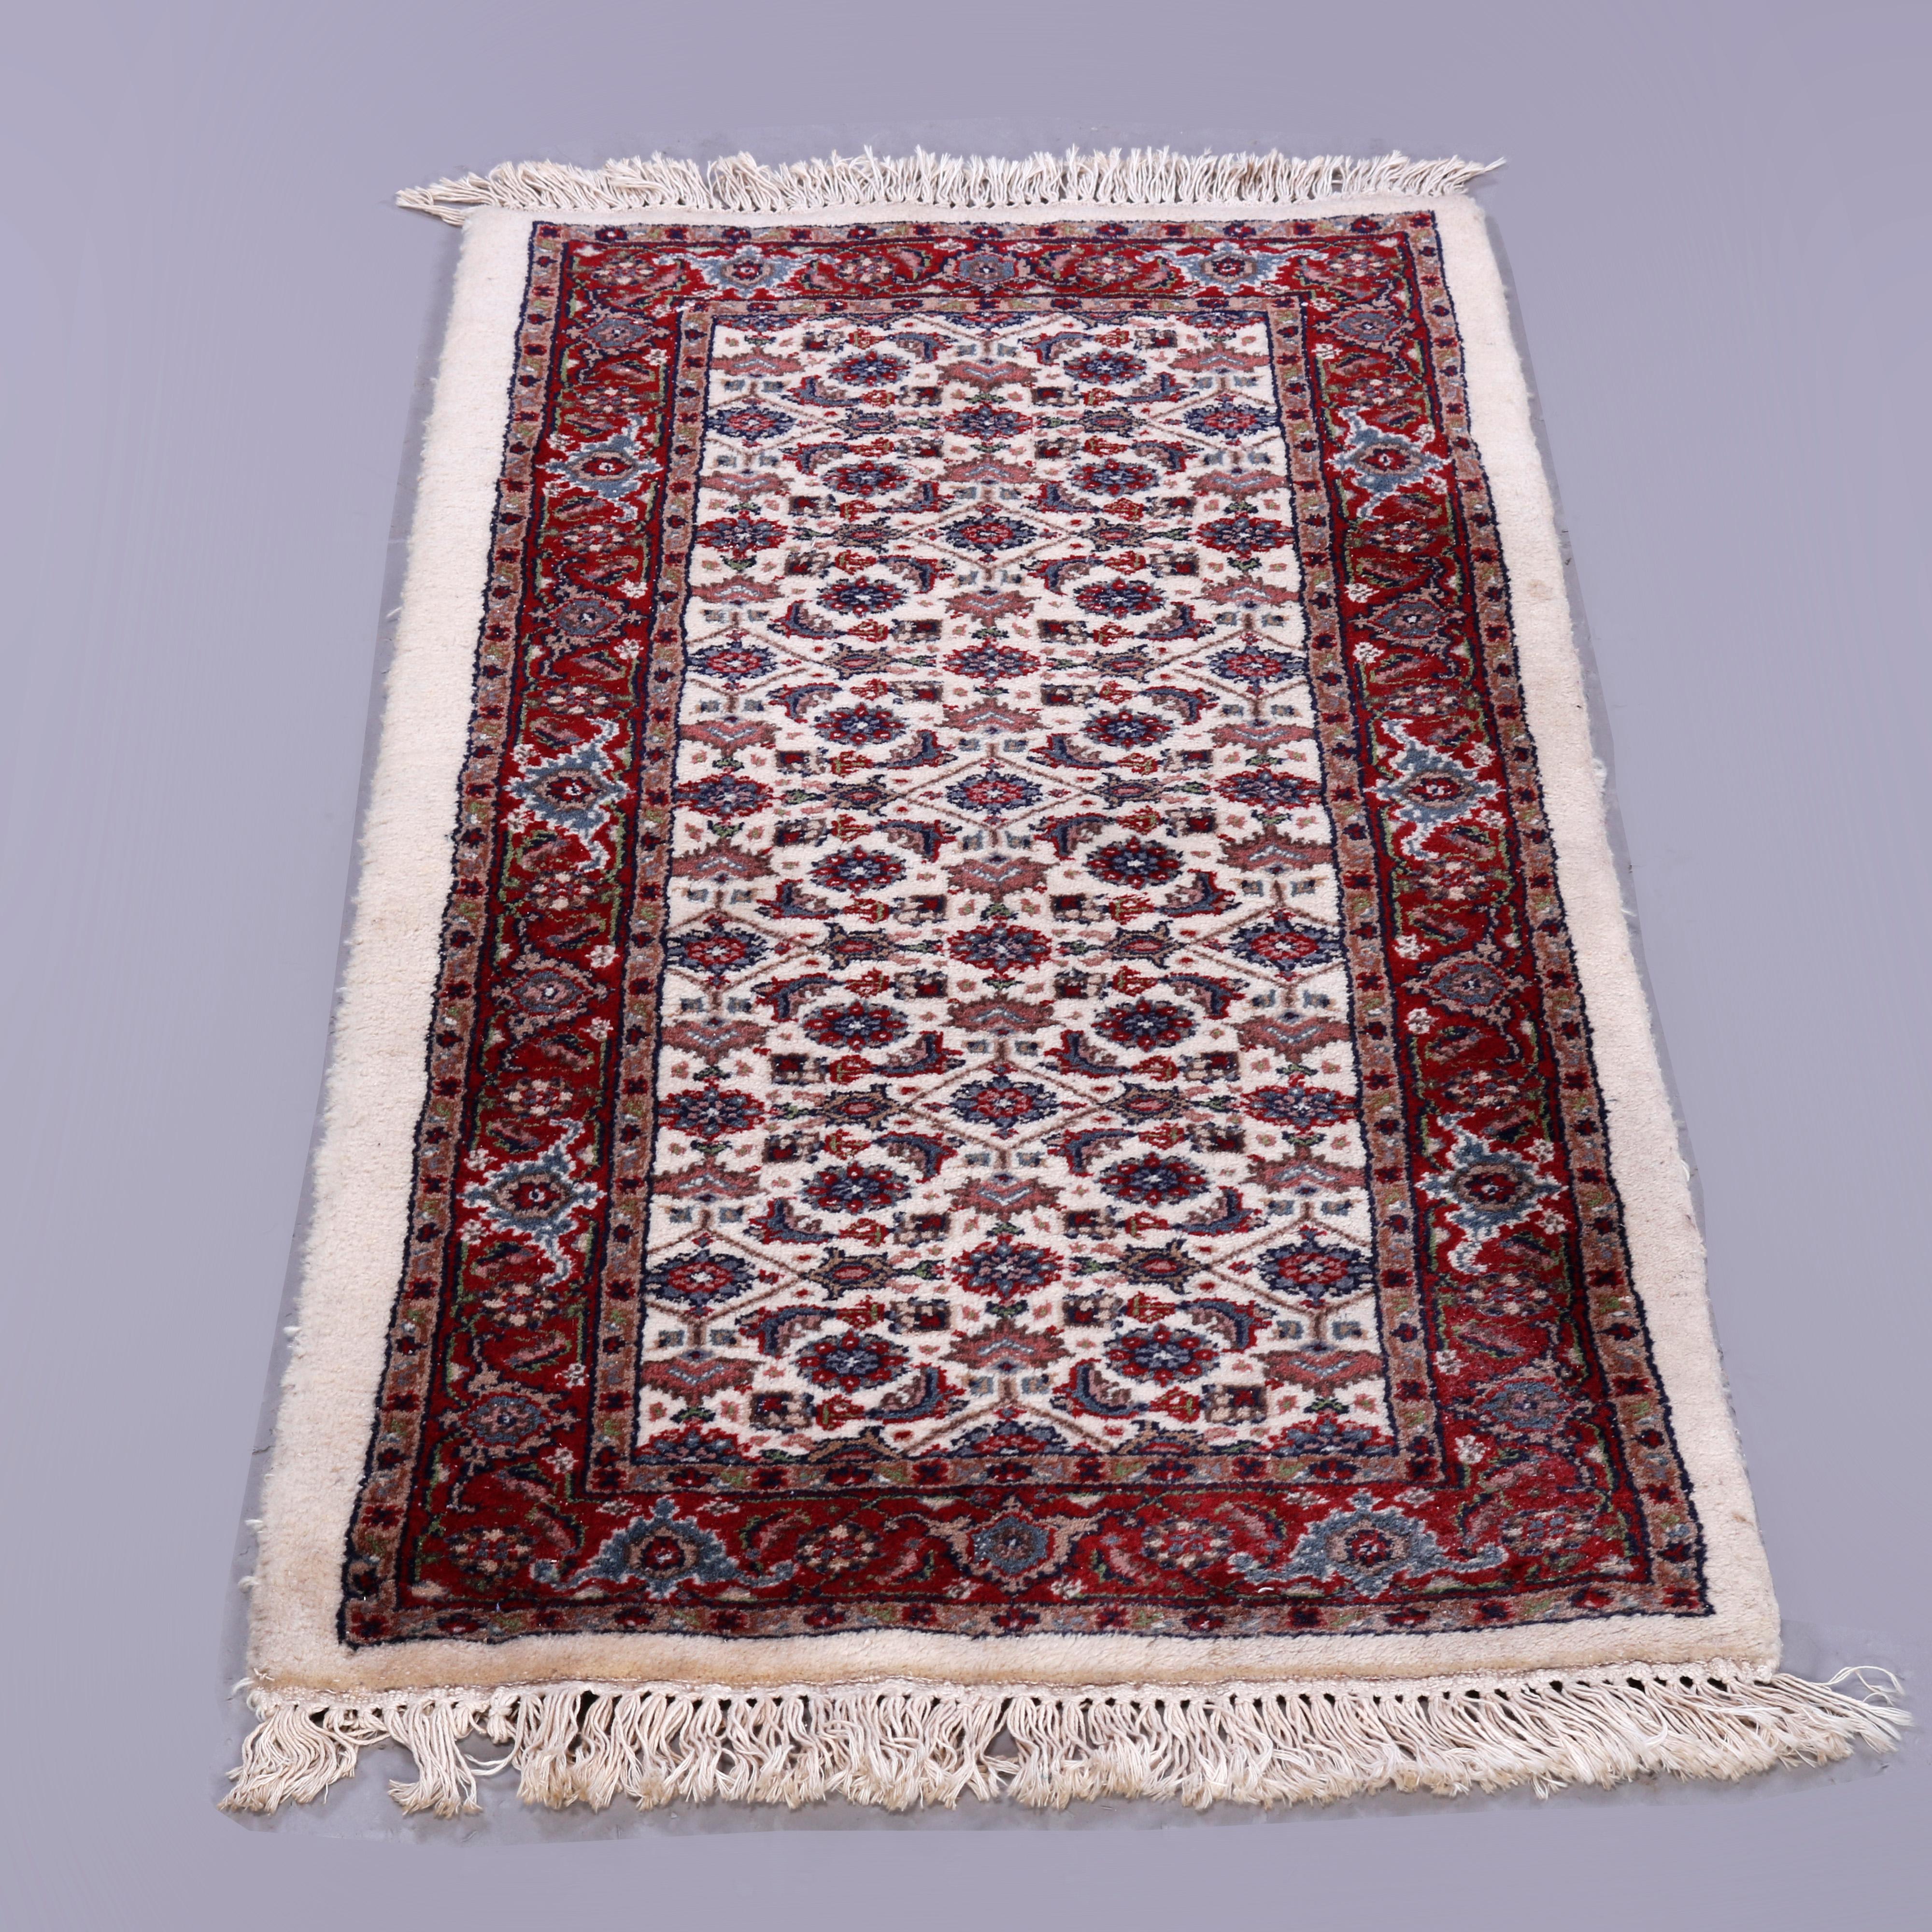 A Persian Bidjar oriental rug offers repeating design of stylized floral and foliate elements on cream ground with complementing red border, circa 1950

Measures - 53''H x 25''W x 1''D.

Catalogue Note: Ask about DISCOUNTED DELIVERY RATES available